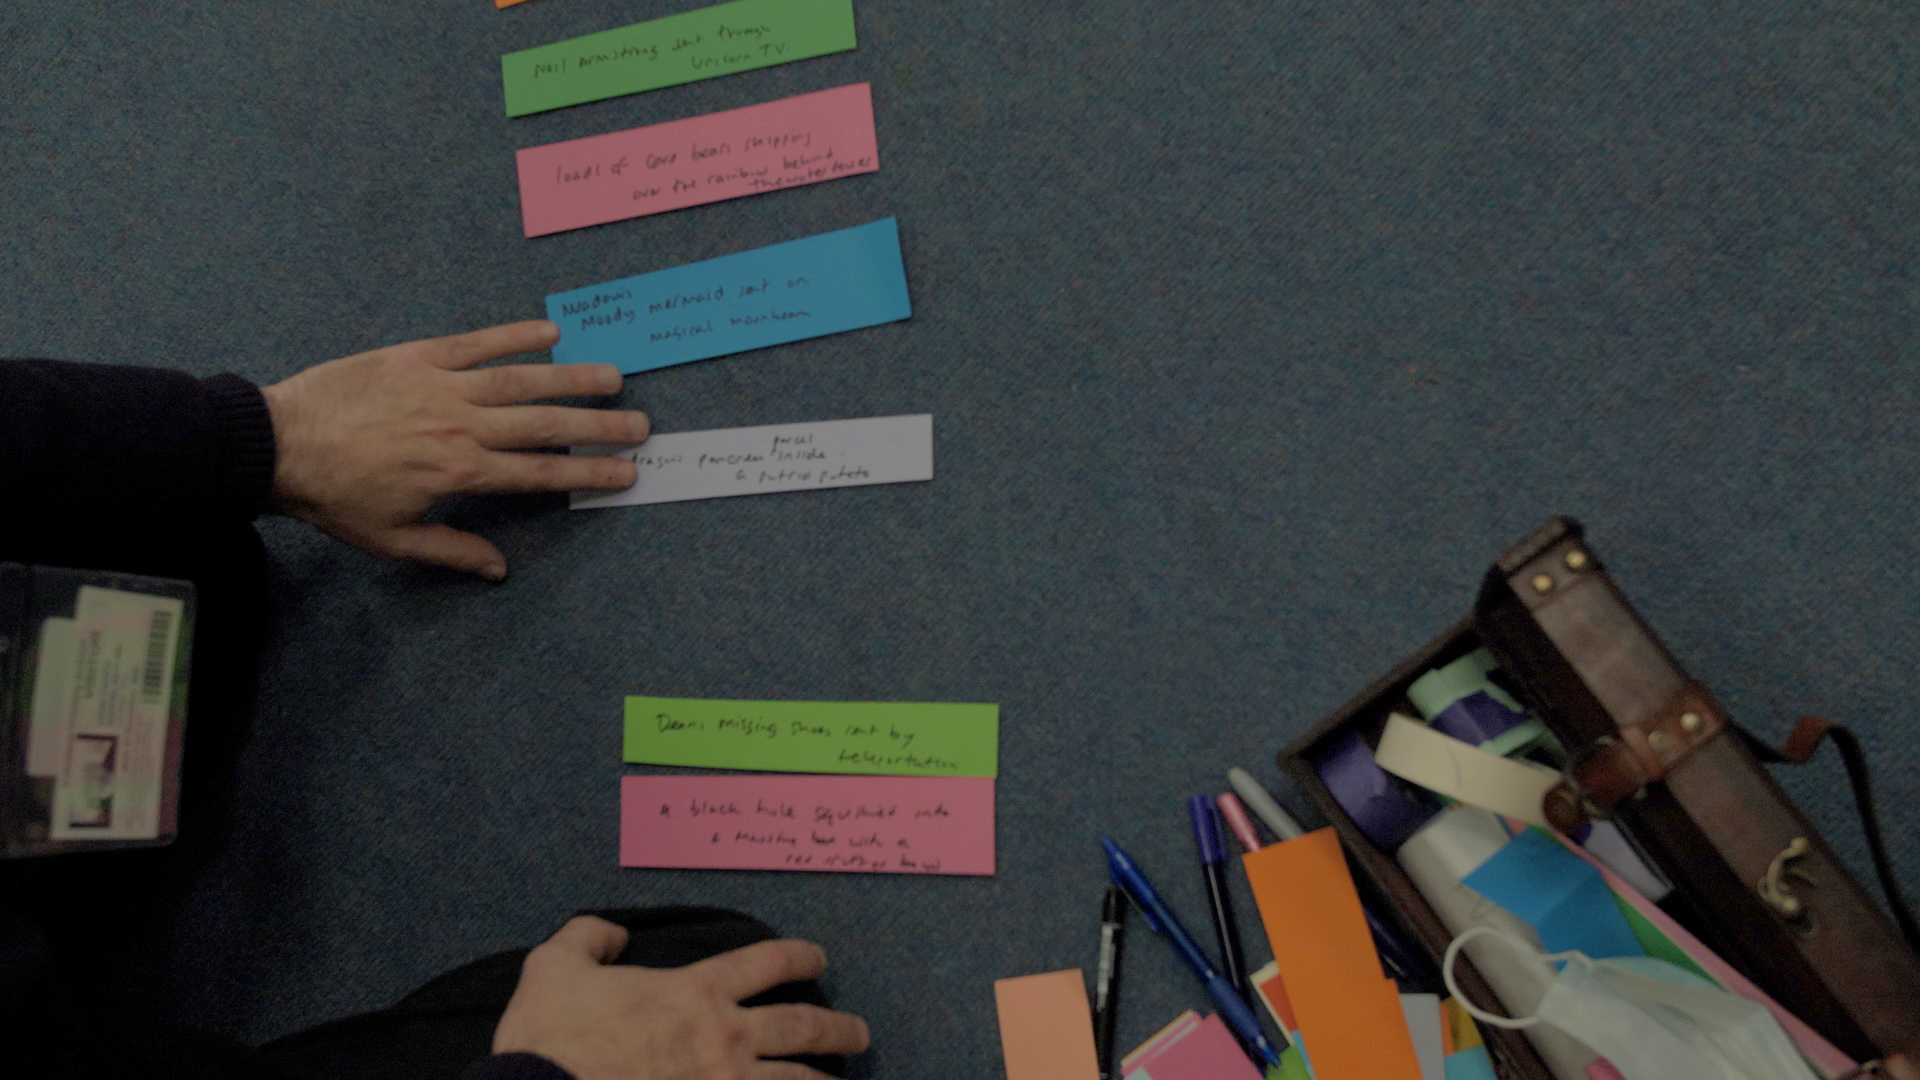 Coloured handwritten strips of paper being arranged to create a poem